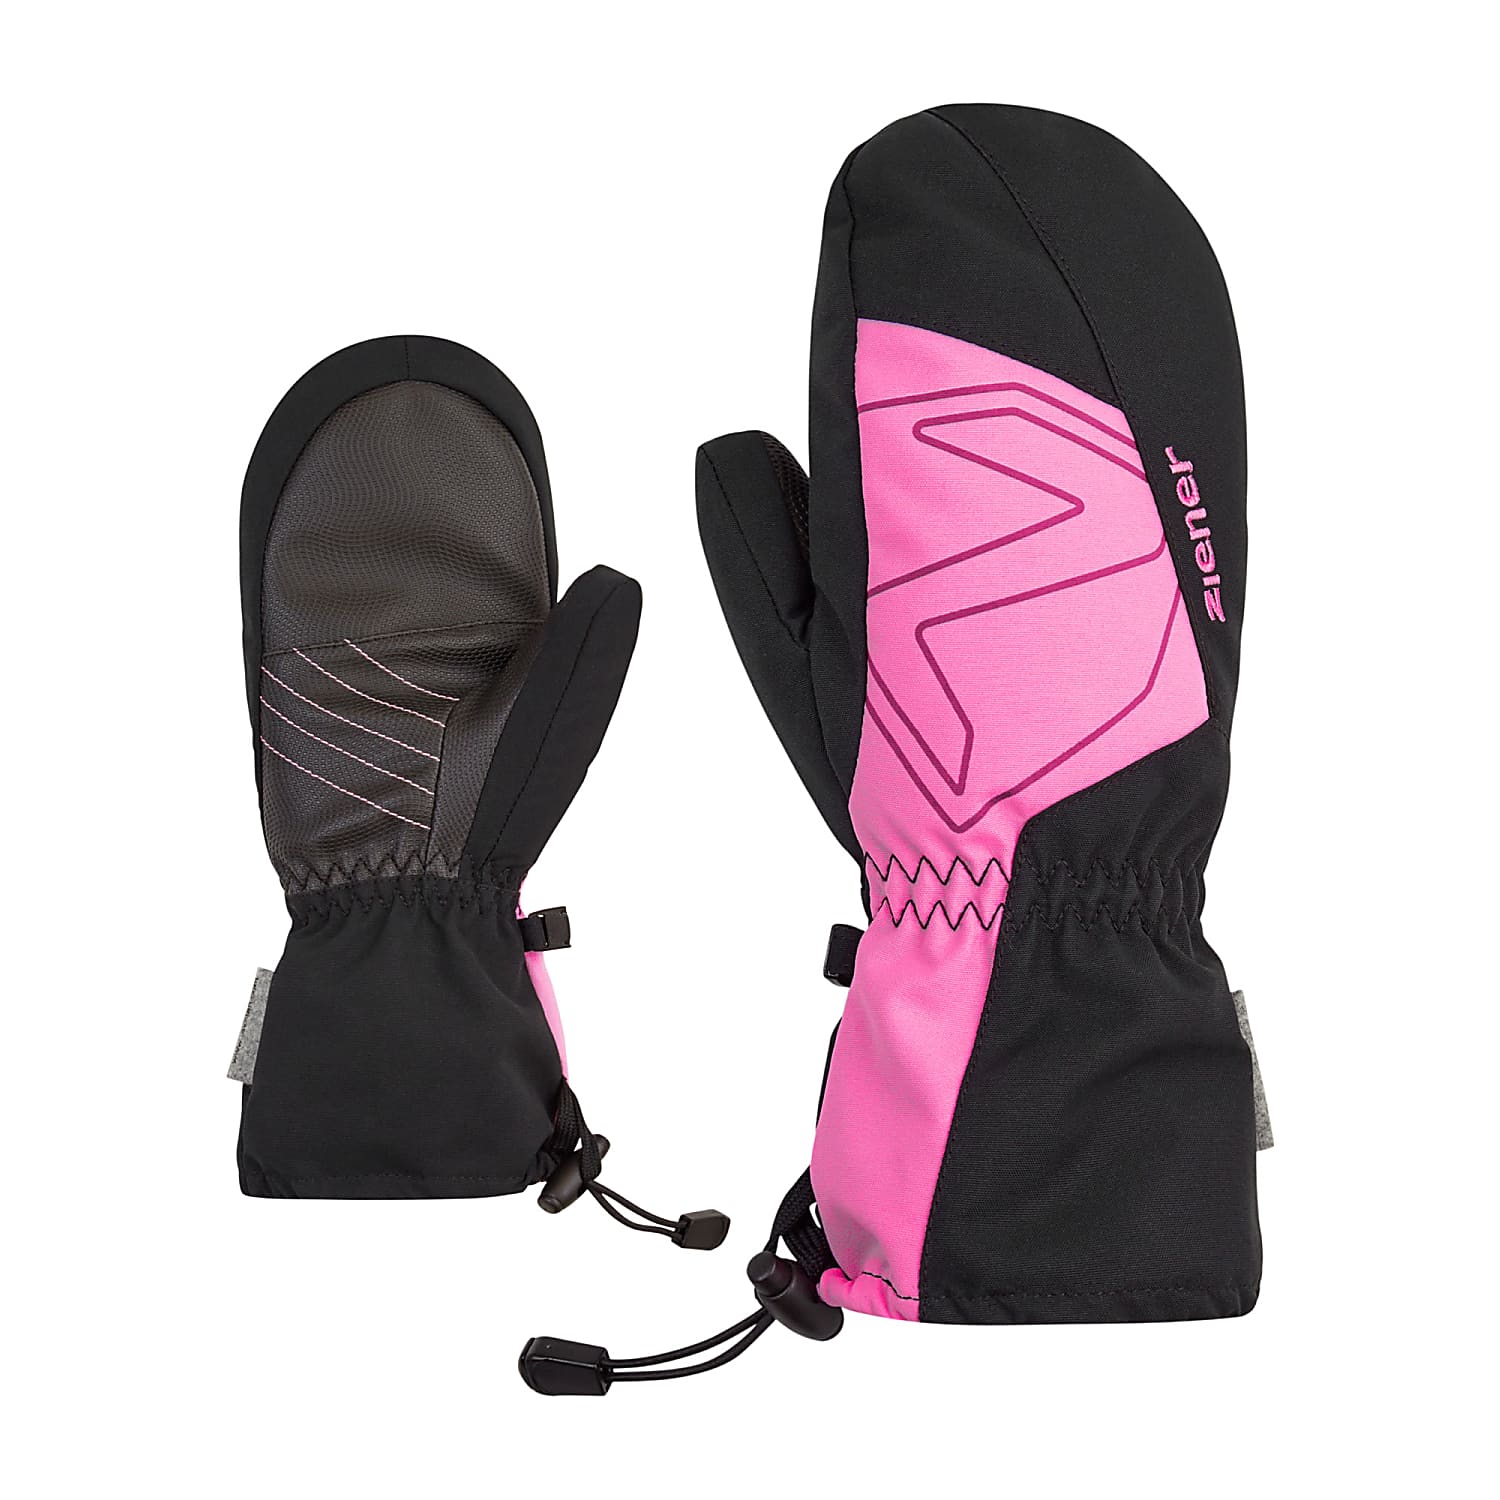 Ziener JUNIOR LAVALINO AS Black shipping Pink - AW MITTEN, cheap Fast - and Fuchsia